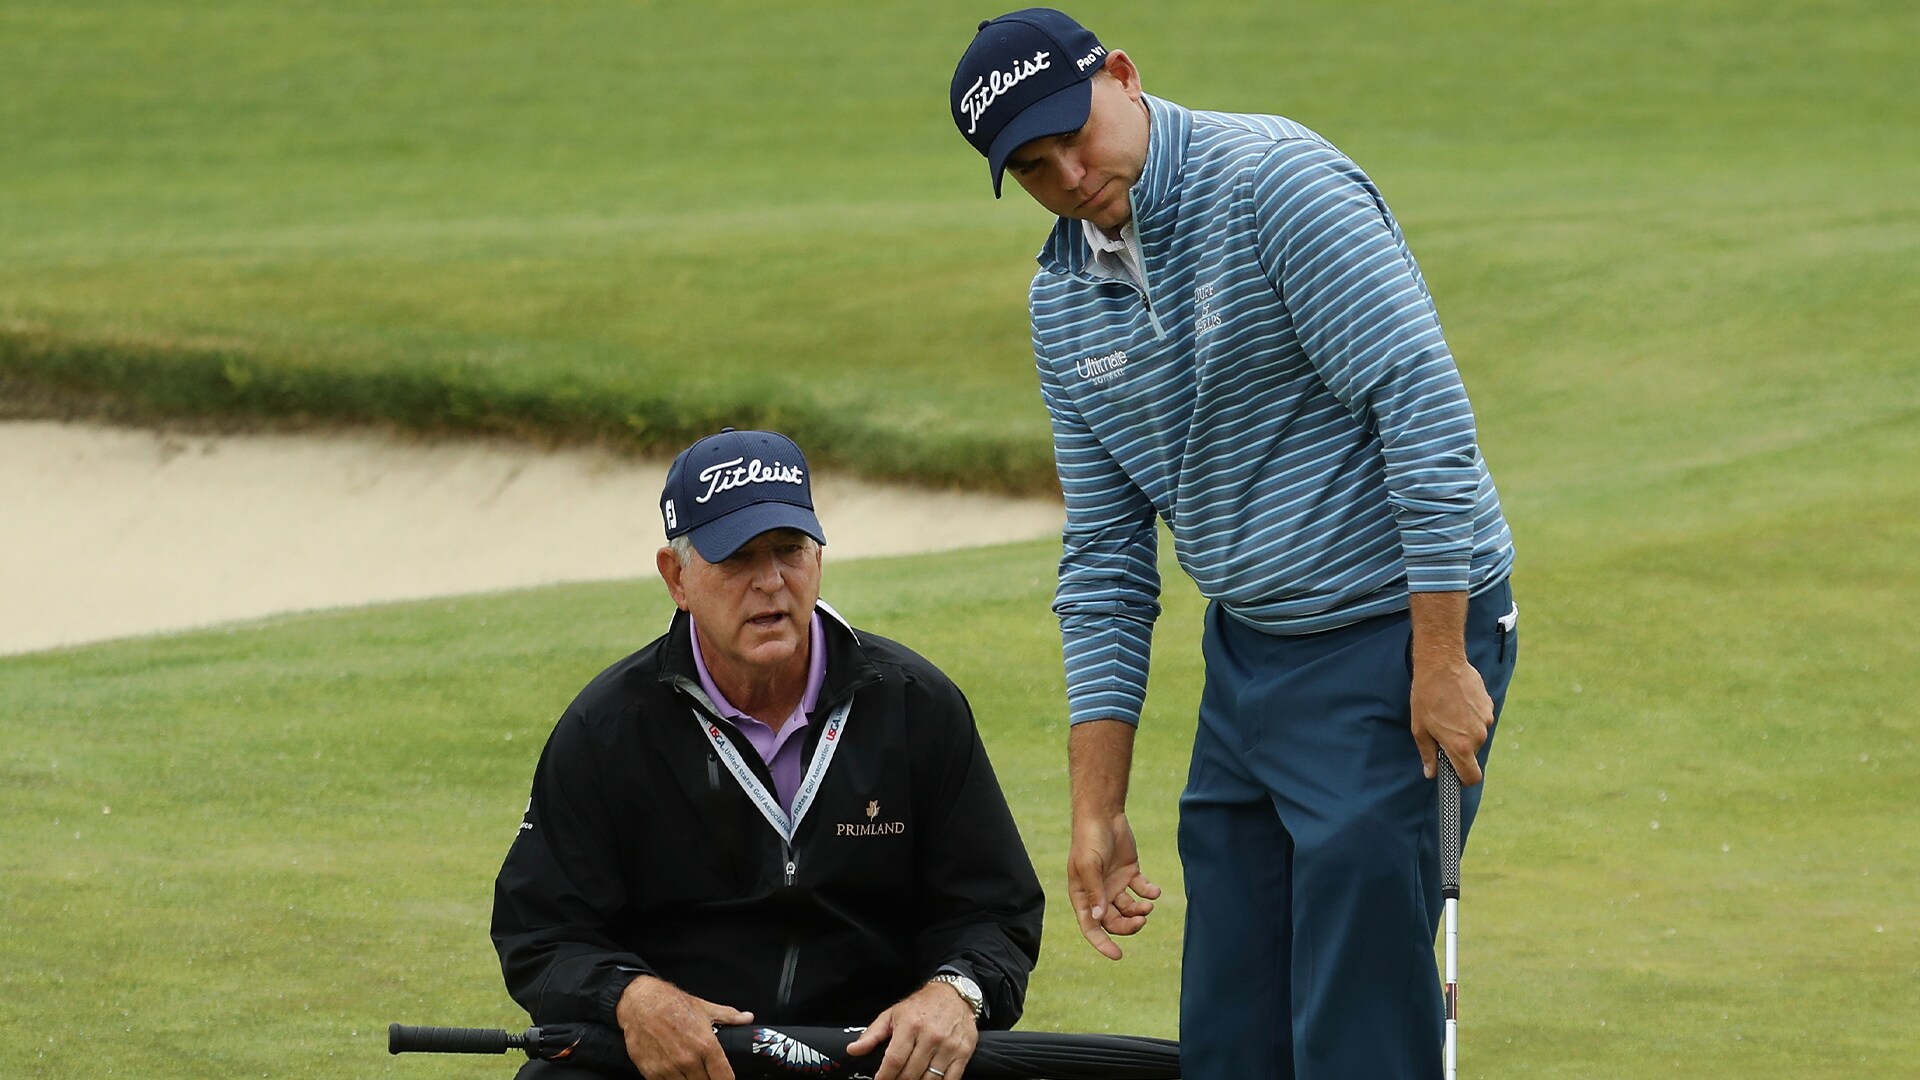 Jay Haas playing with Bill at Zurich in what was supposed to be 800th PGA Tour start